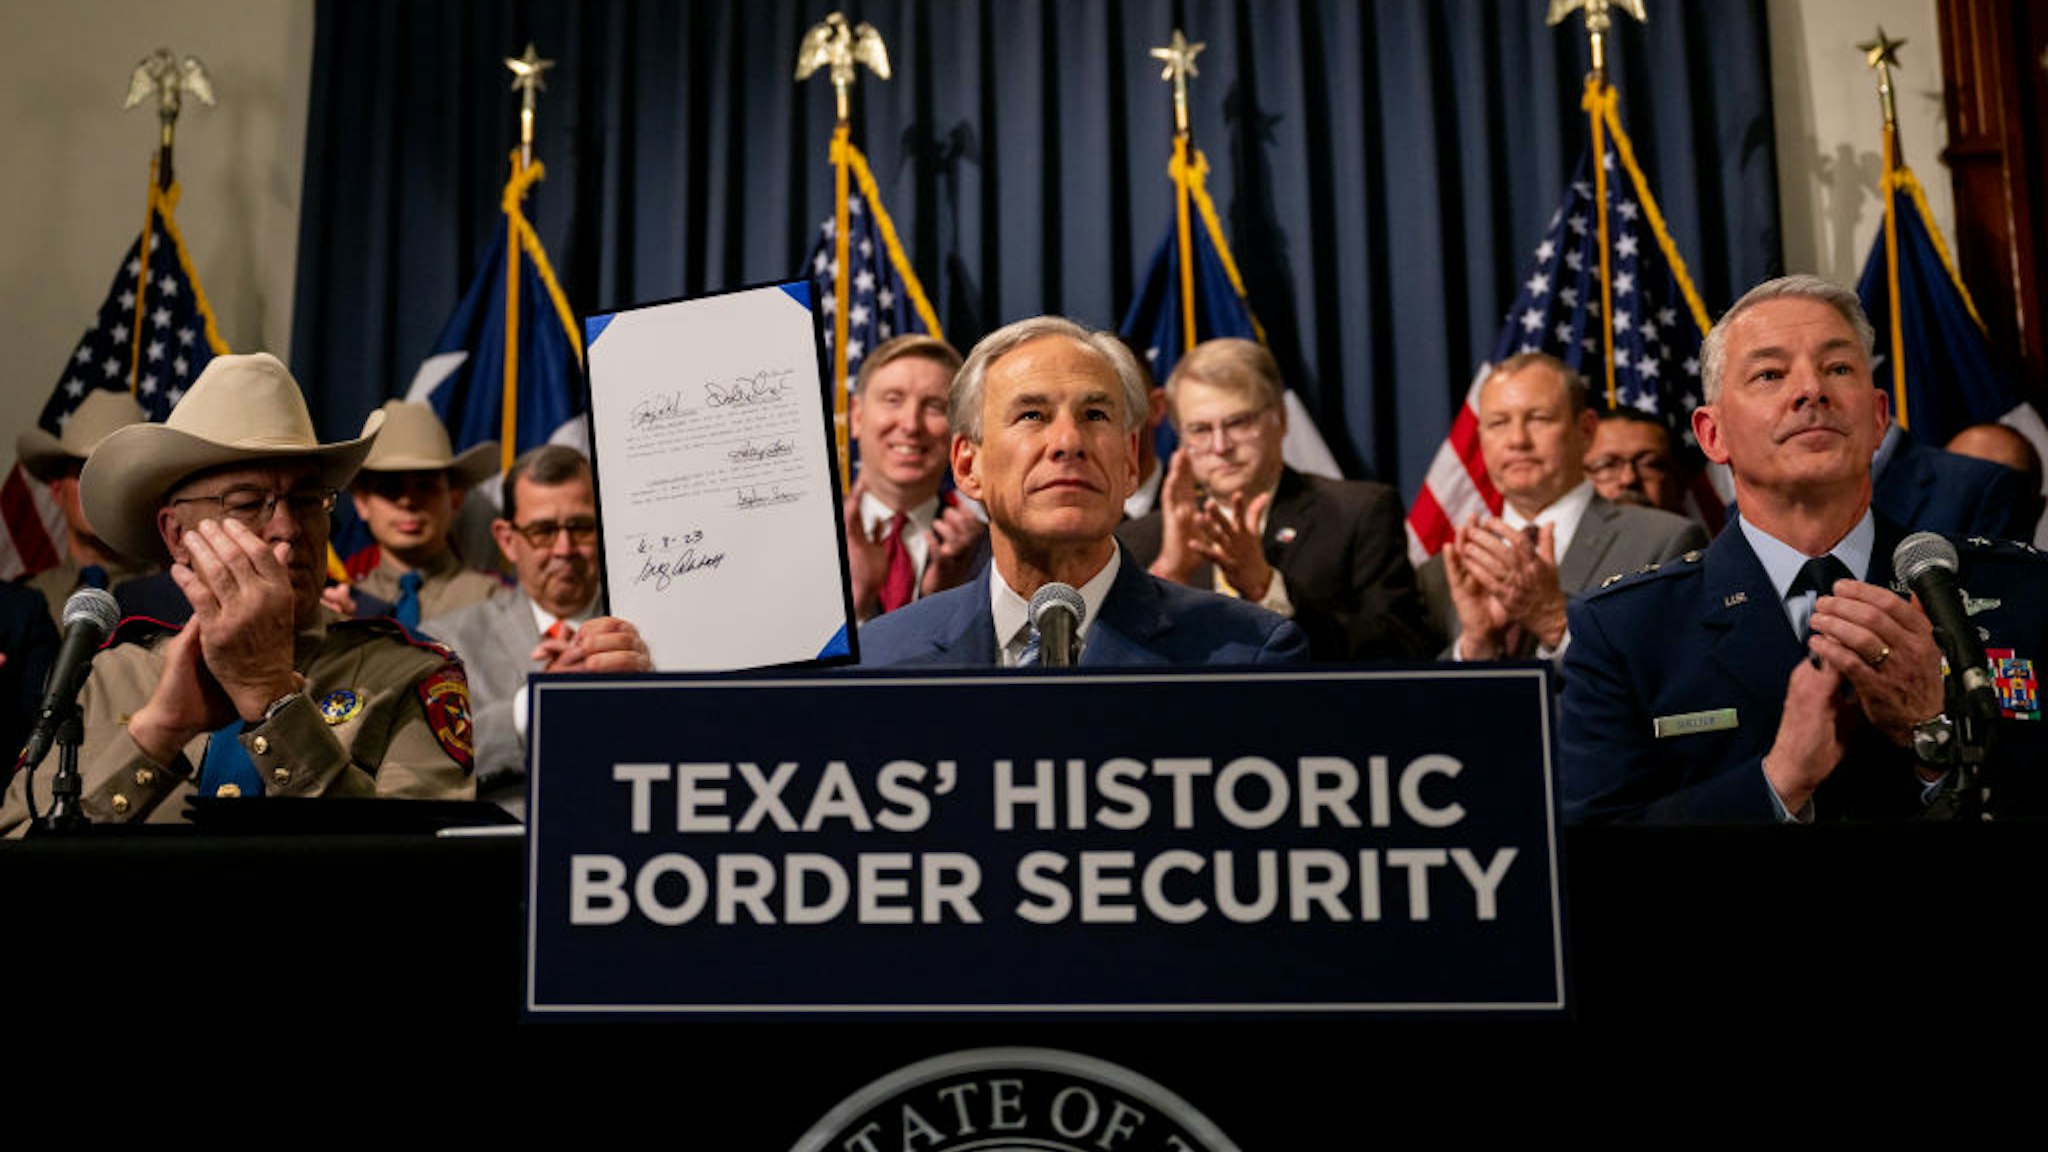 AUSTIN, TEXAS - JUNE 08: Texas Gov. Greg Abbott displays a signed bill during a news conference at the Texas State Capitol on June 08, 2023 in Austin, Texas. Gov. Abbott and Texas Department of Public Safety Director Steve McCraw joined bill authors, sponsors, legislators and law enforcement members in the signing of bills designated towards enhancing border security along the southern border.